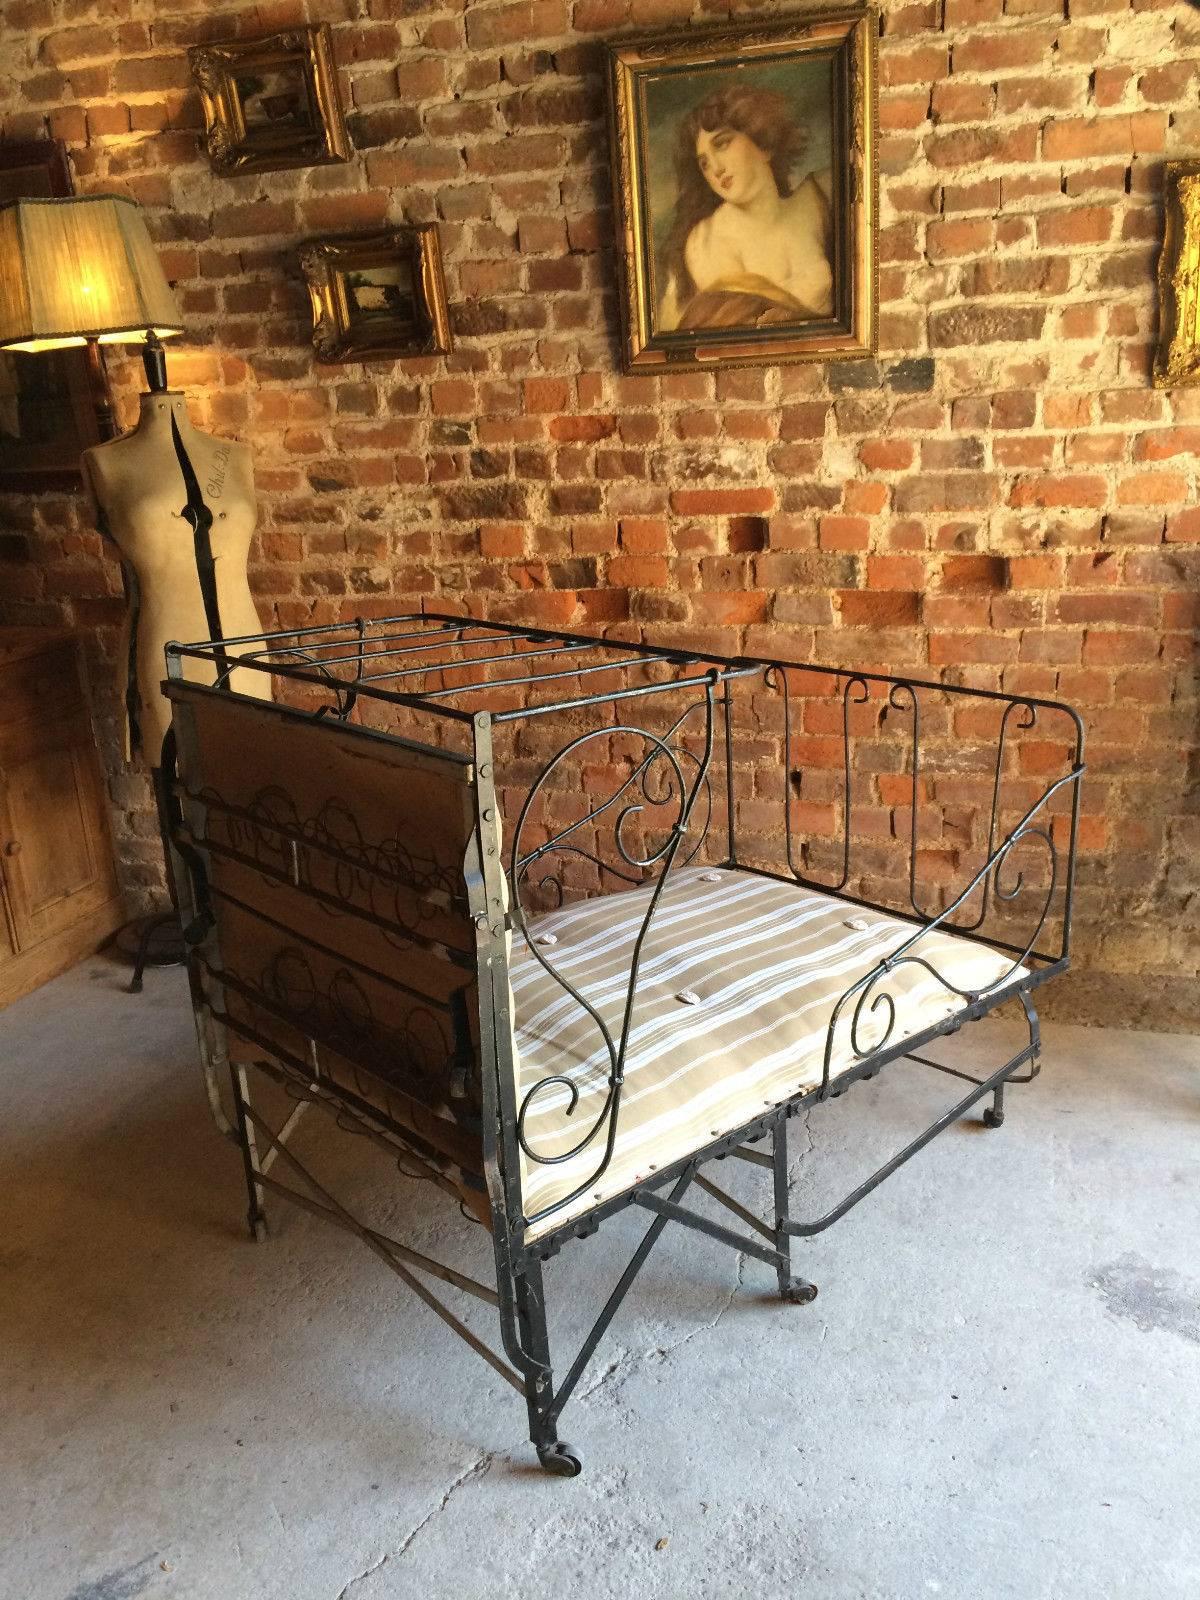 A French antique floor standing campaign day bed, striped sprung mattress with scrollwork detail and standing on raised legs with casters, folds down easily.